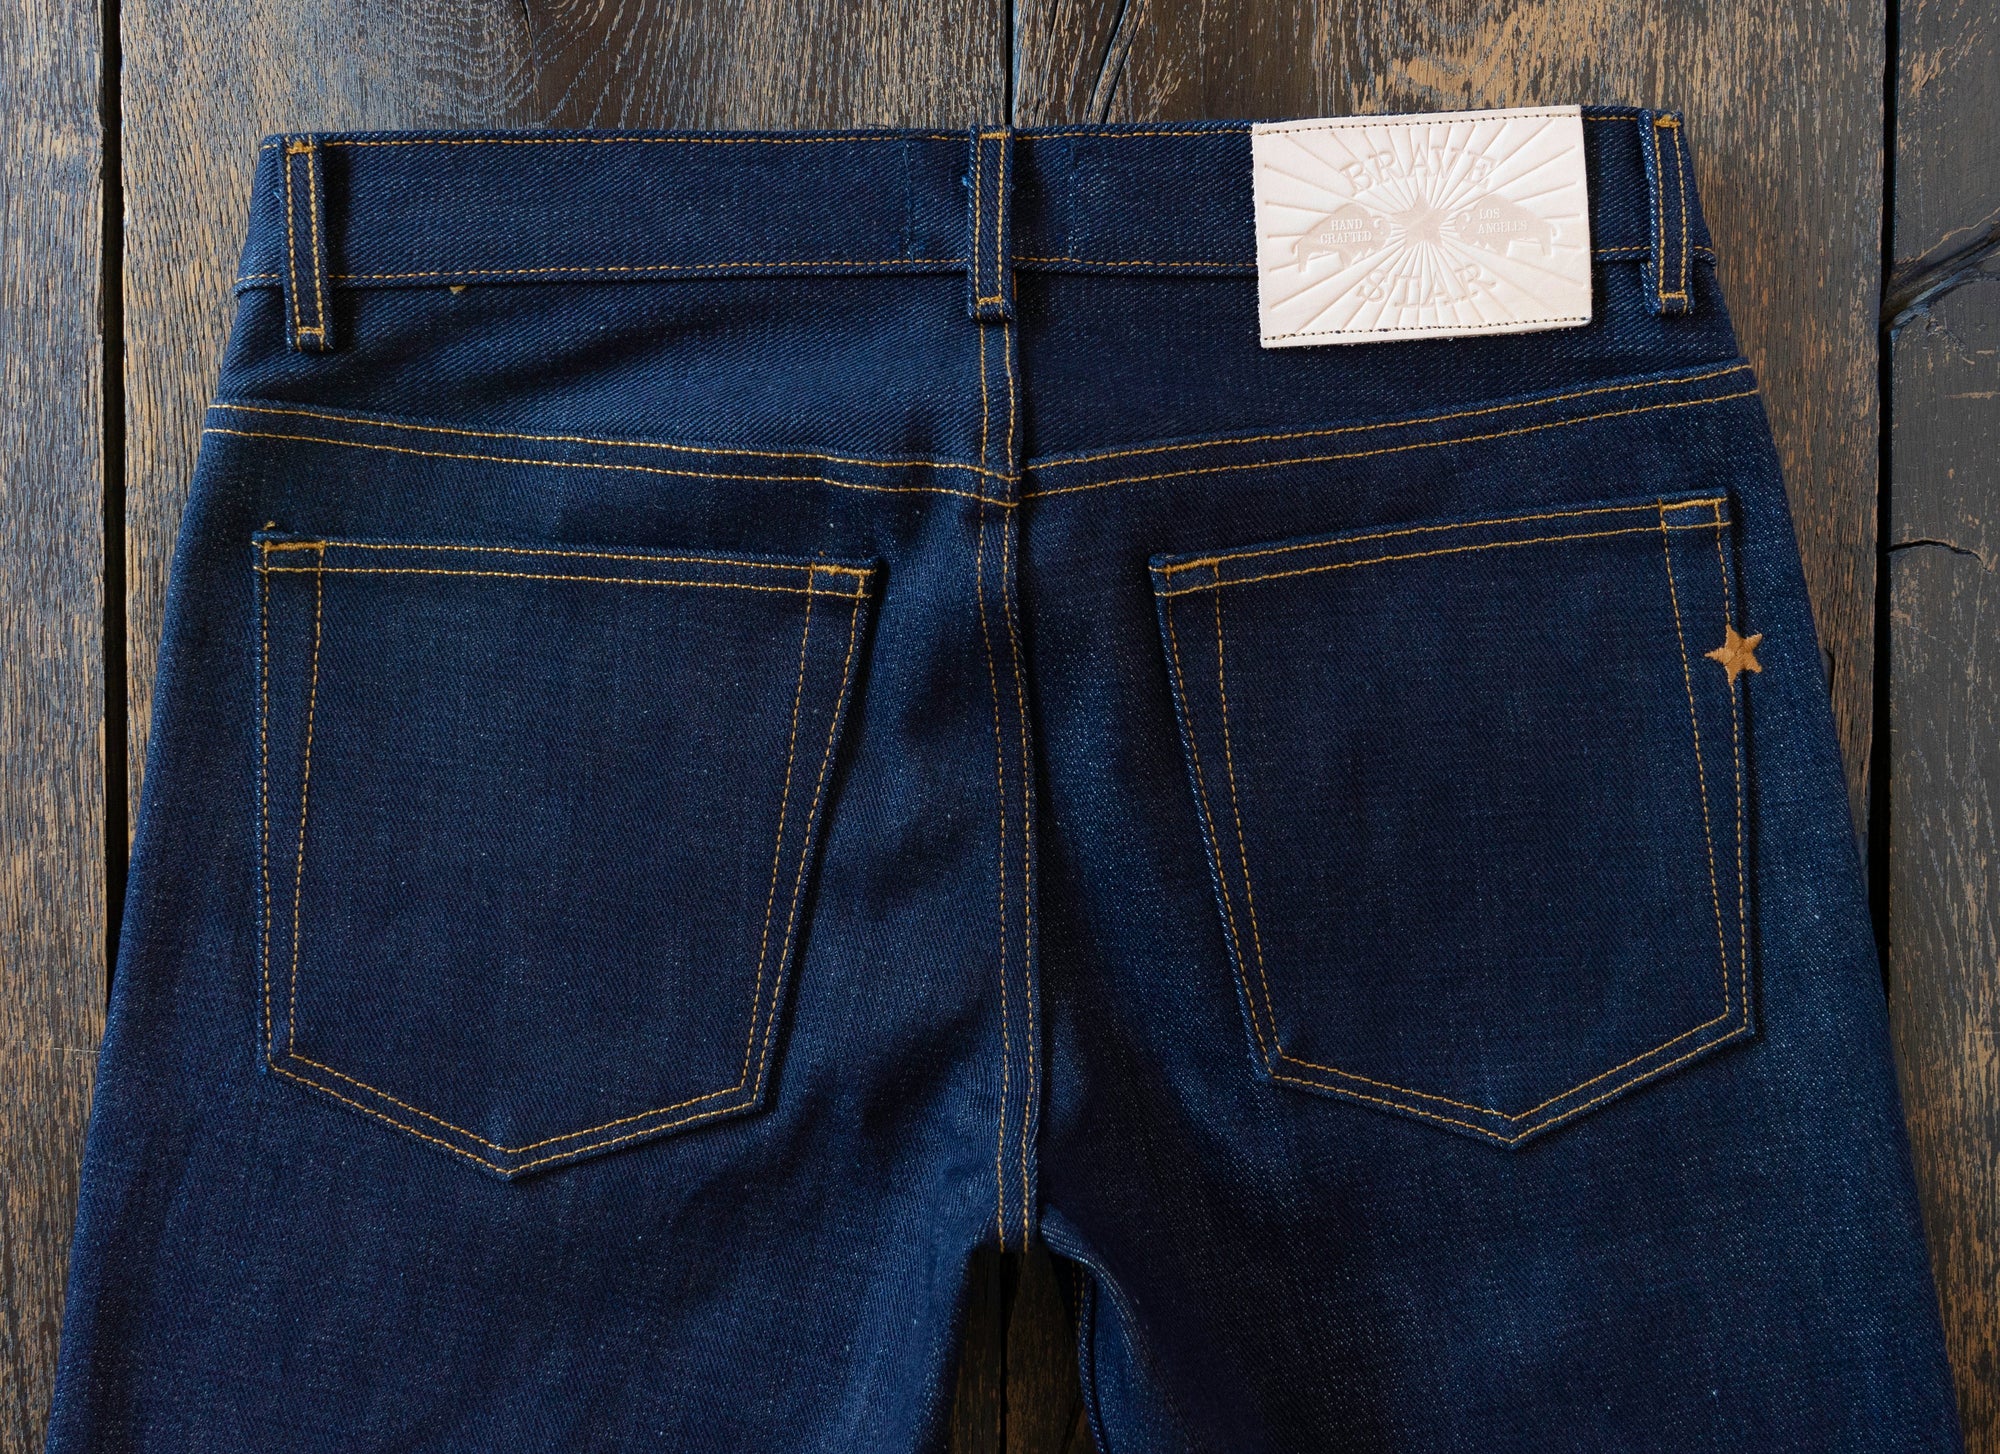 A More Focused Update of the 21.5 oz BRAVESTAR Selvedge